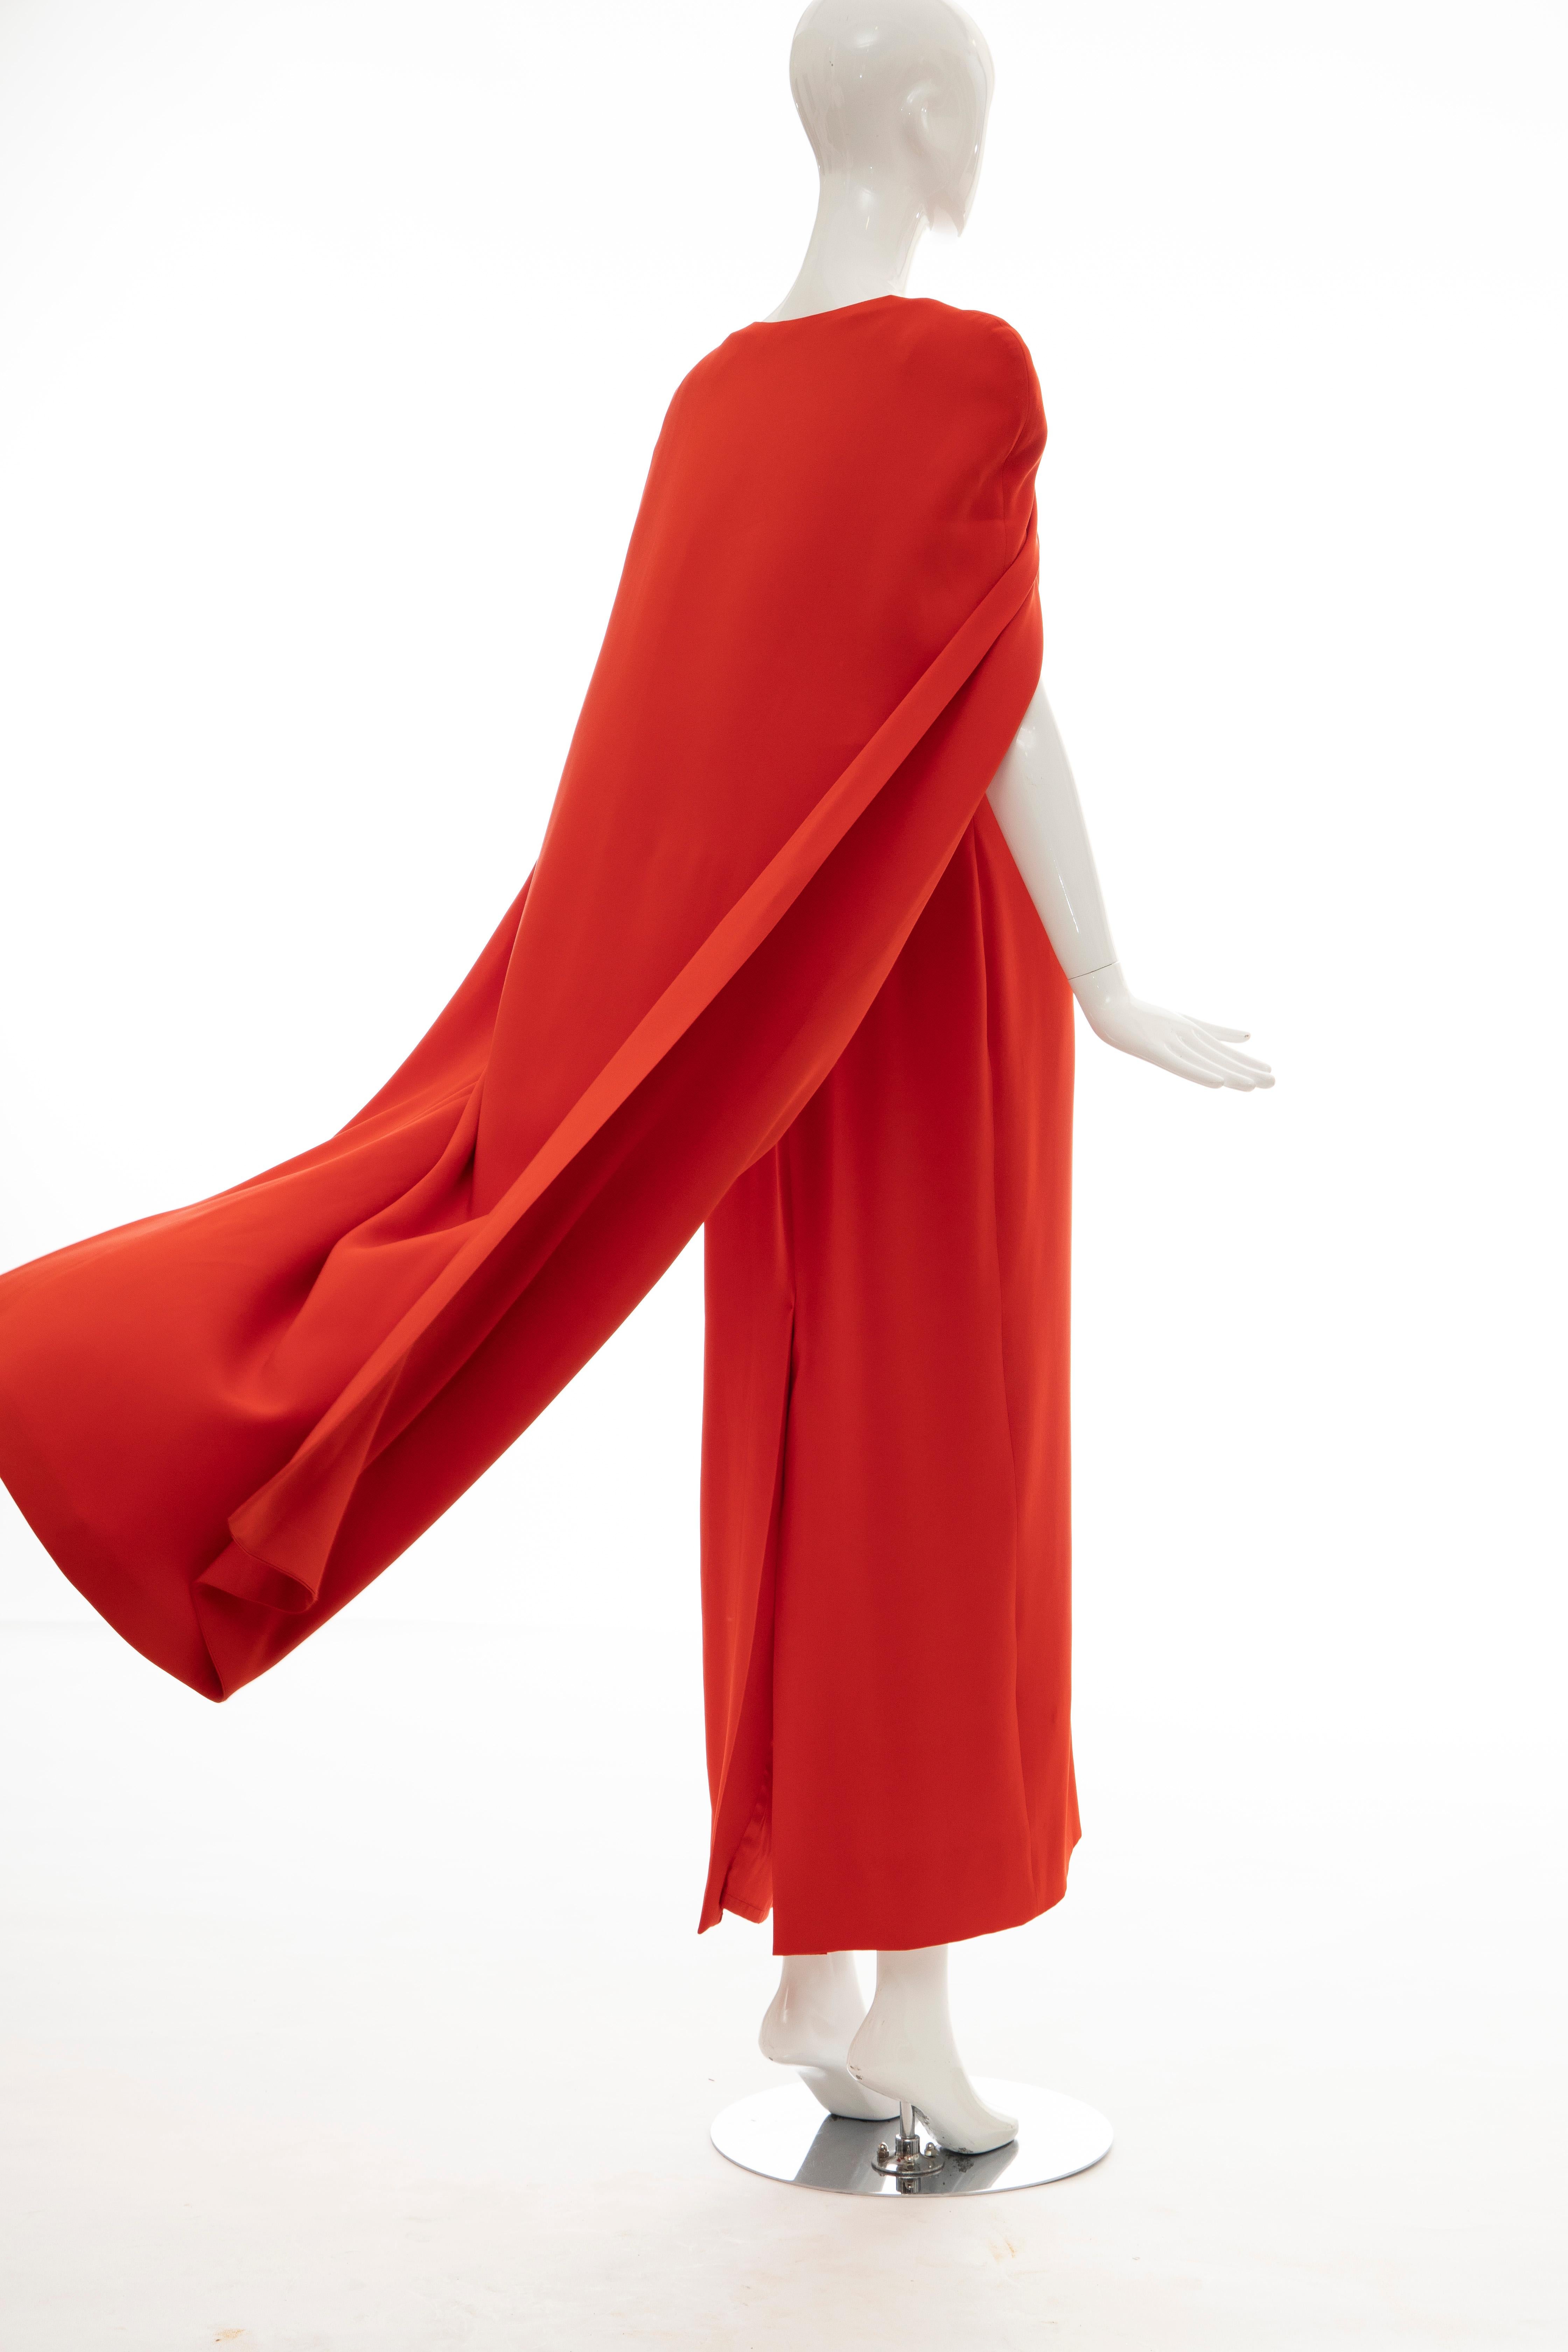 Tom Ford Runway Silk Persimmon Evening Dress With Cape, Fall 2012 6